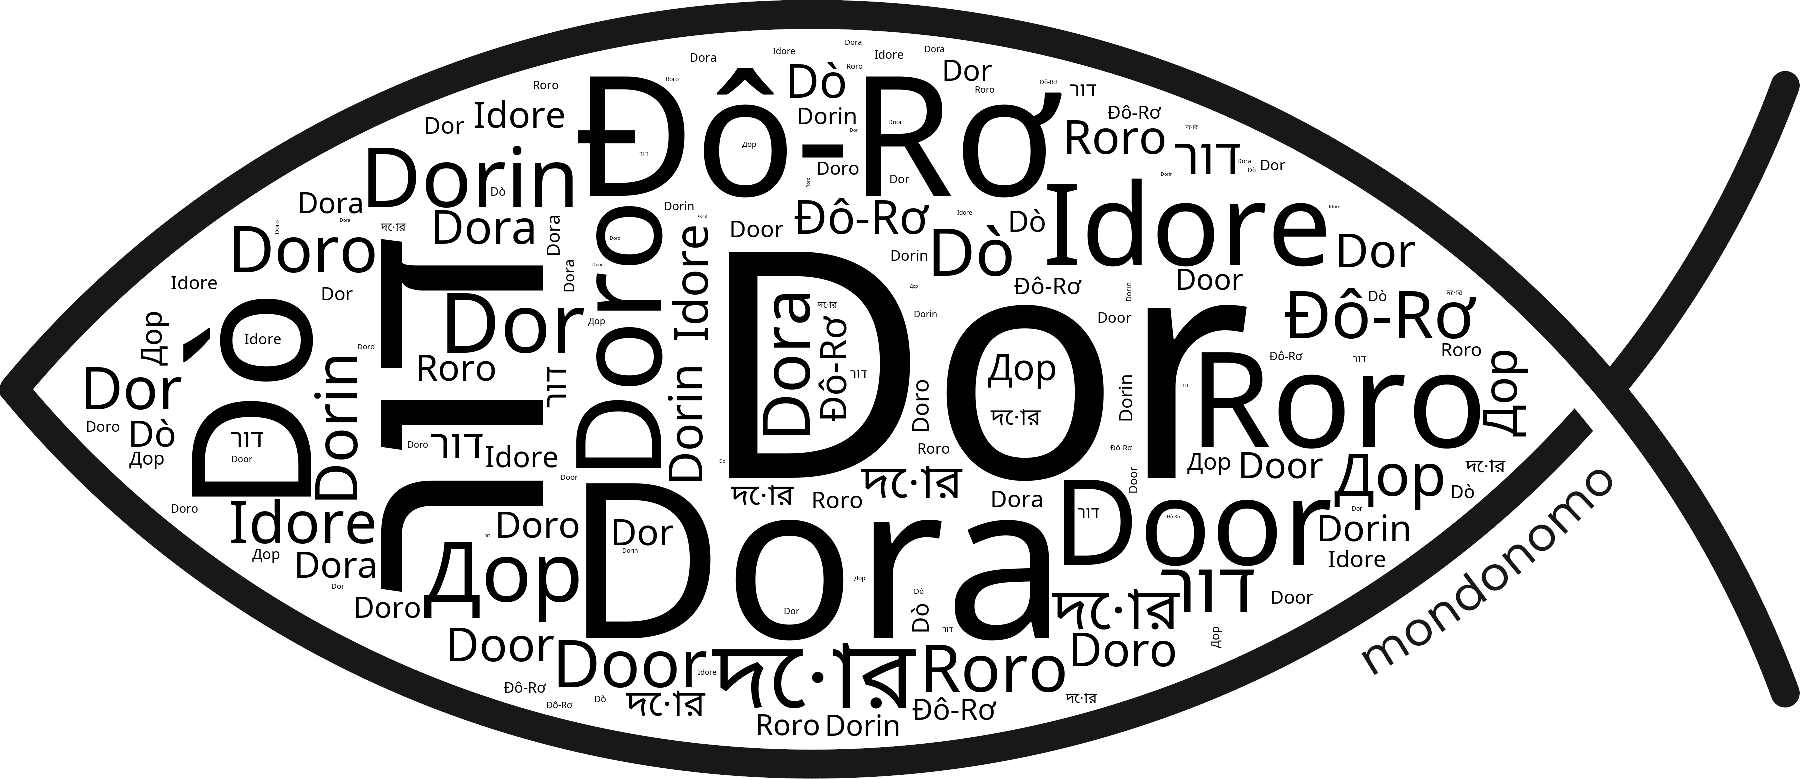 Name Dor in the world's Bibles